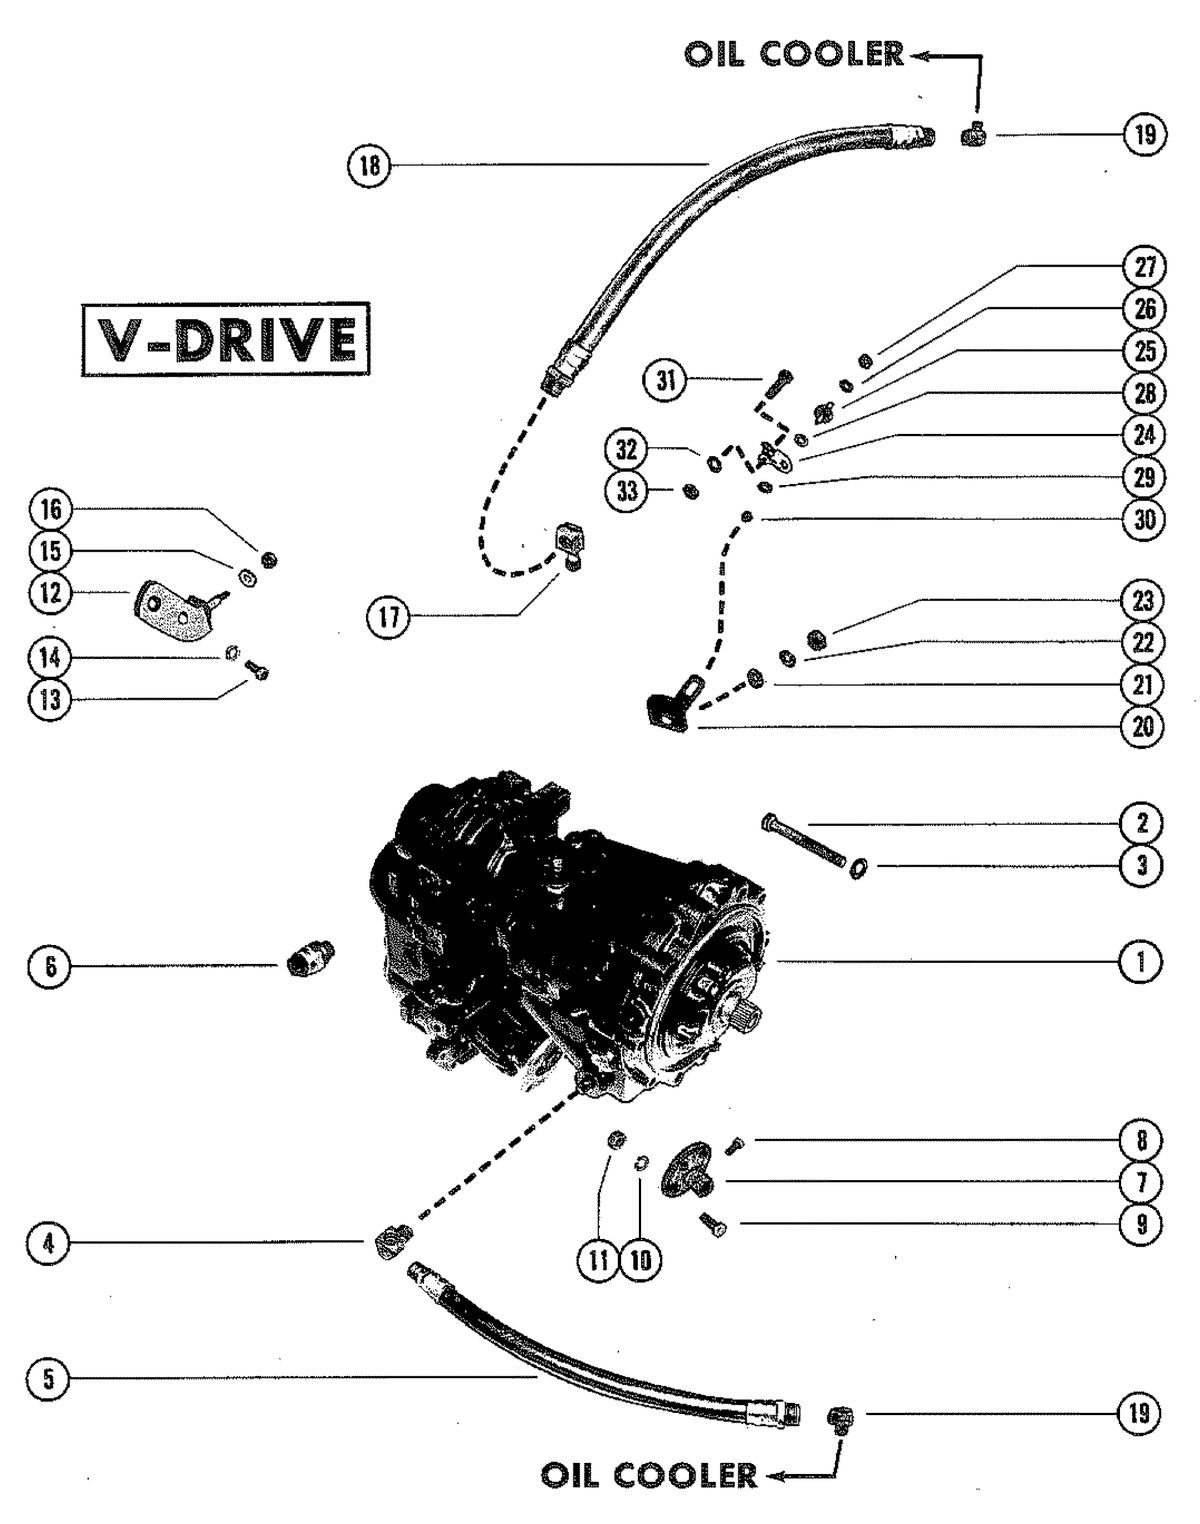 MERCRUISER 898 (STERN DRIVE) 198 (INBOARD) ENGINE TRANSMISSION AND RELATED PARTS (V-DRIVE)